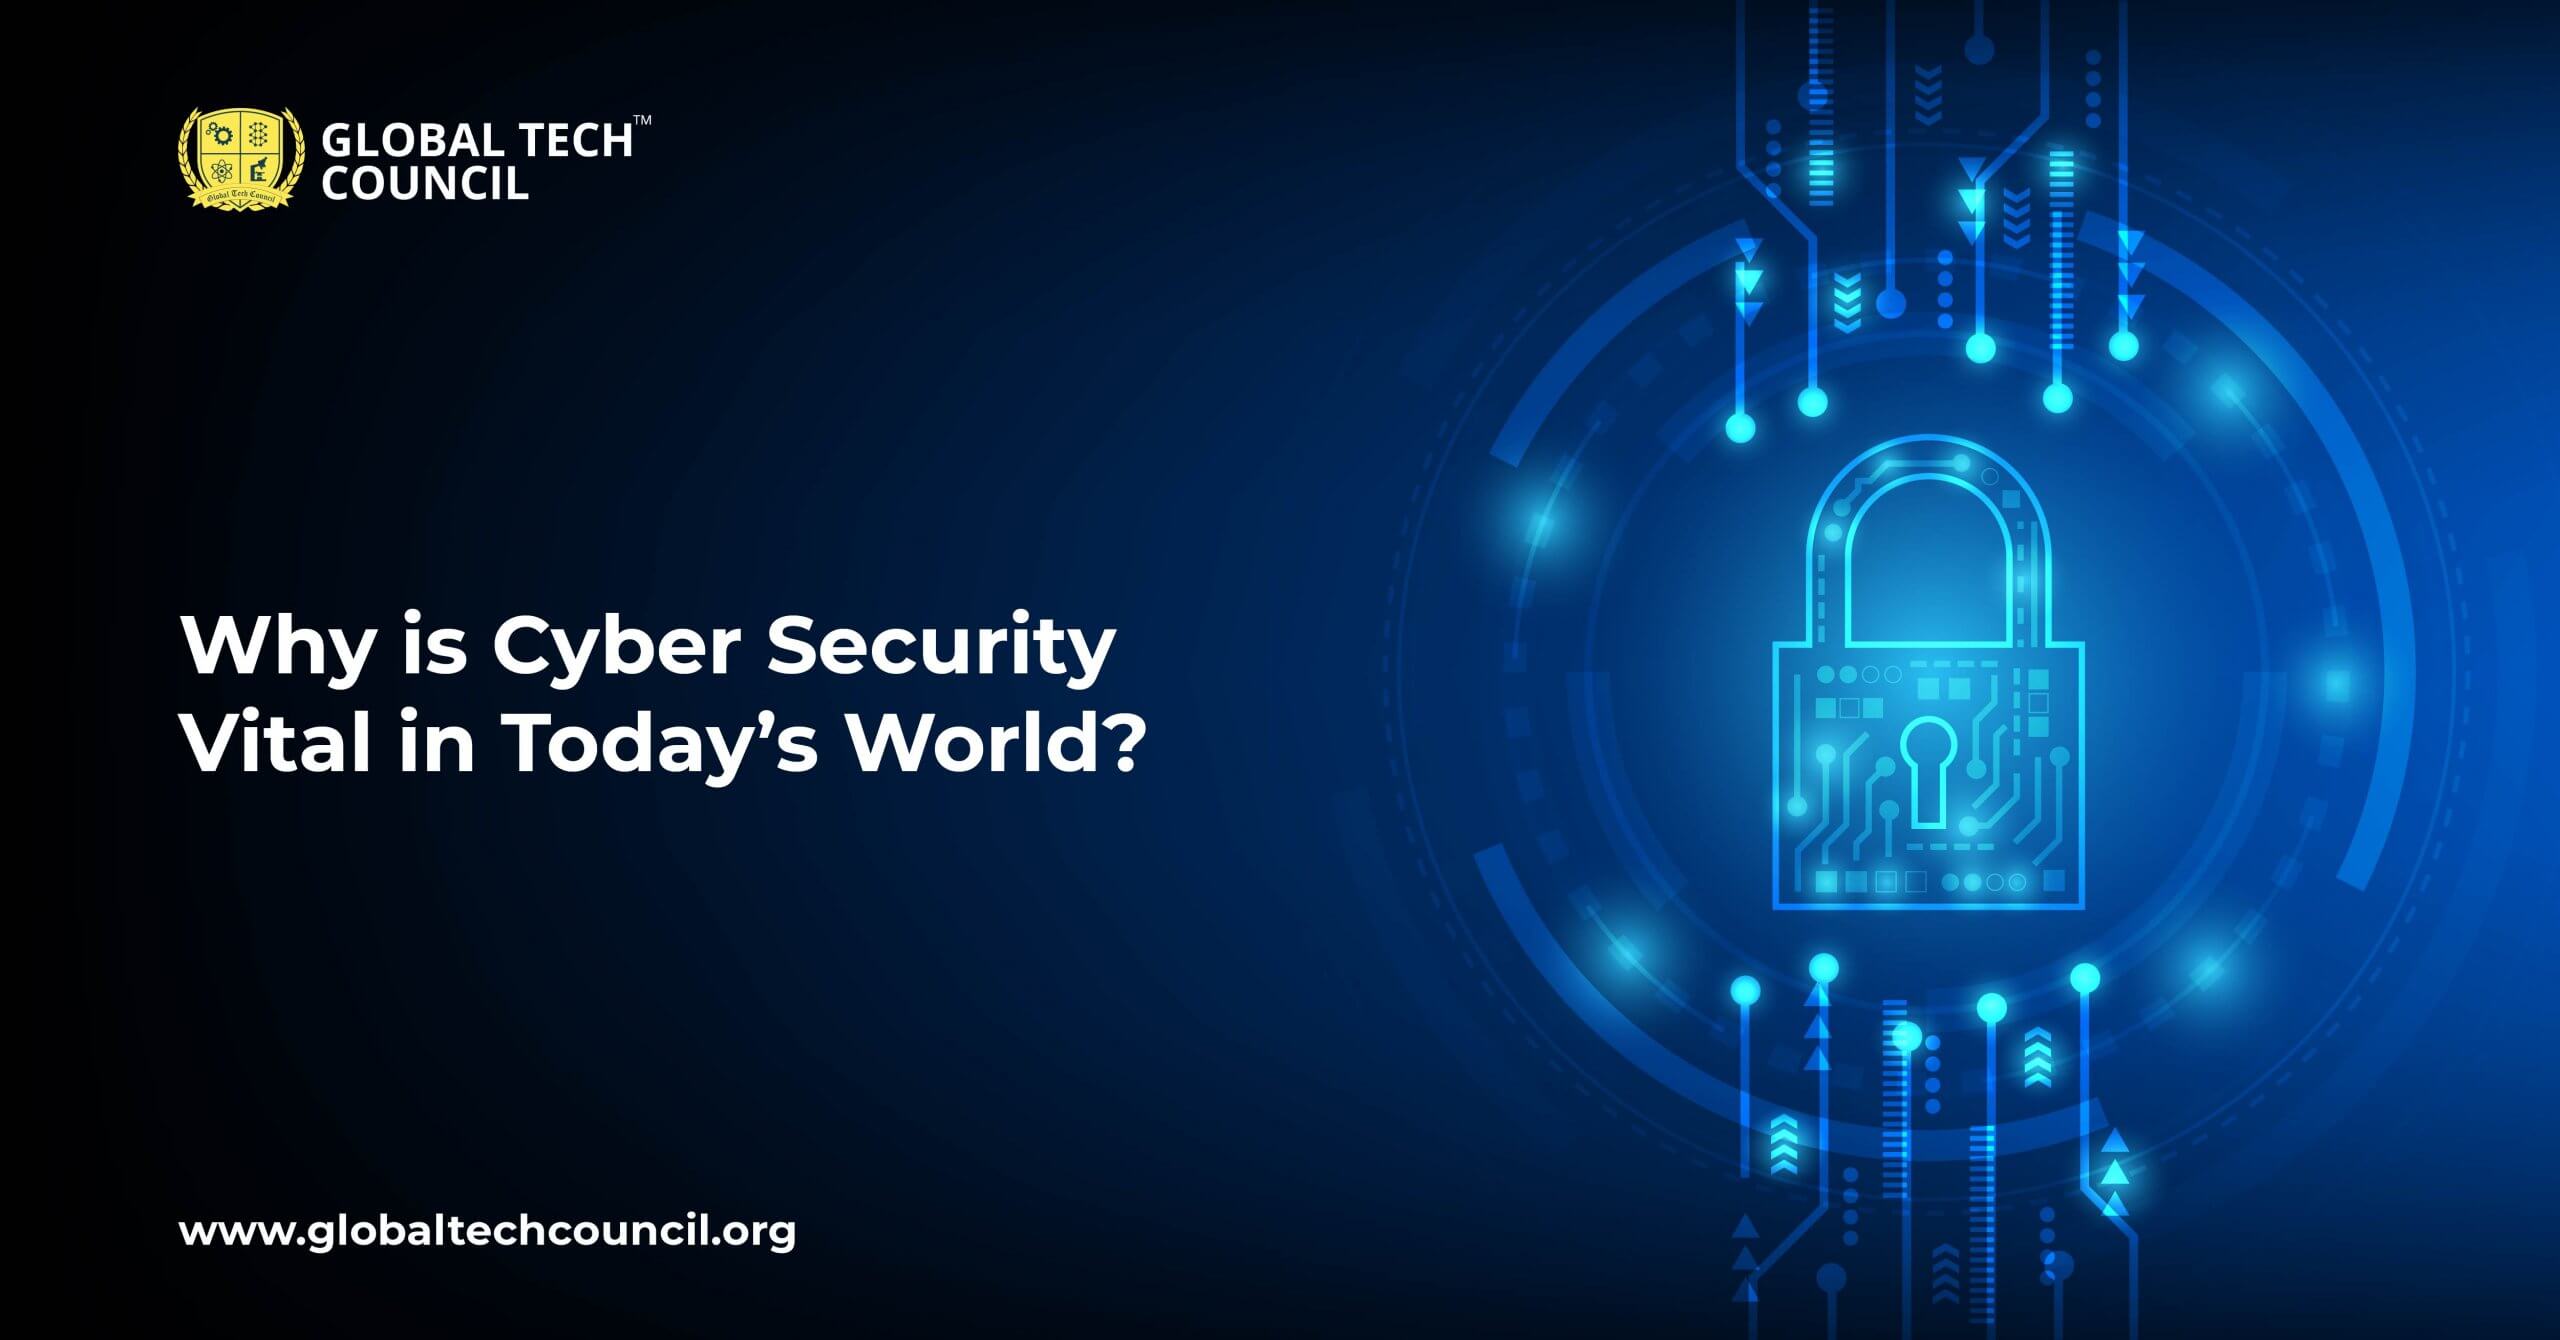 Why is Cyber Security Important in Today’s World